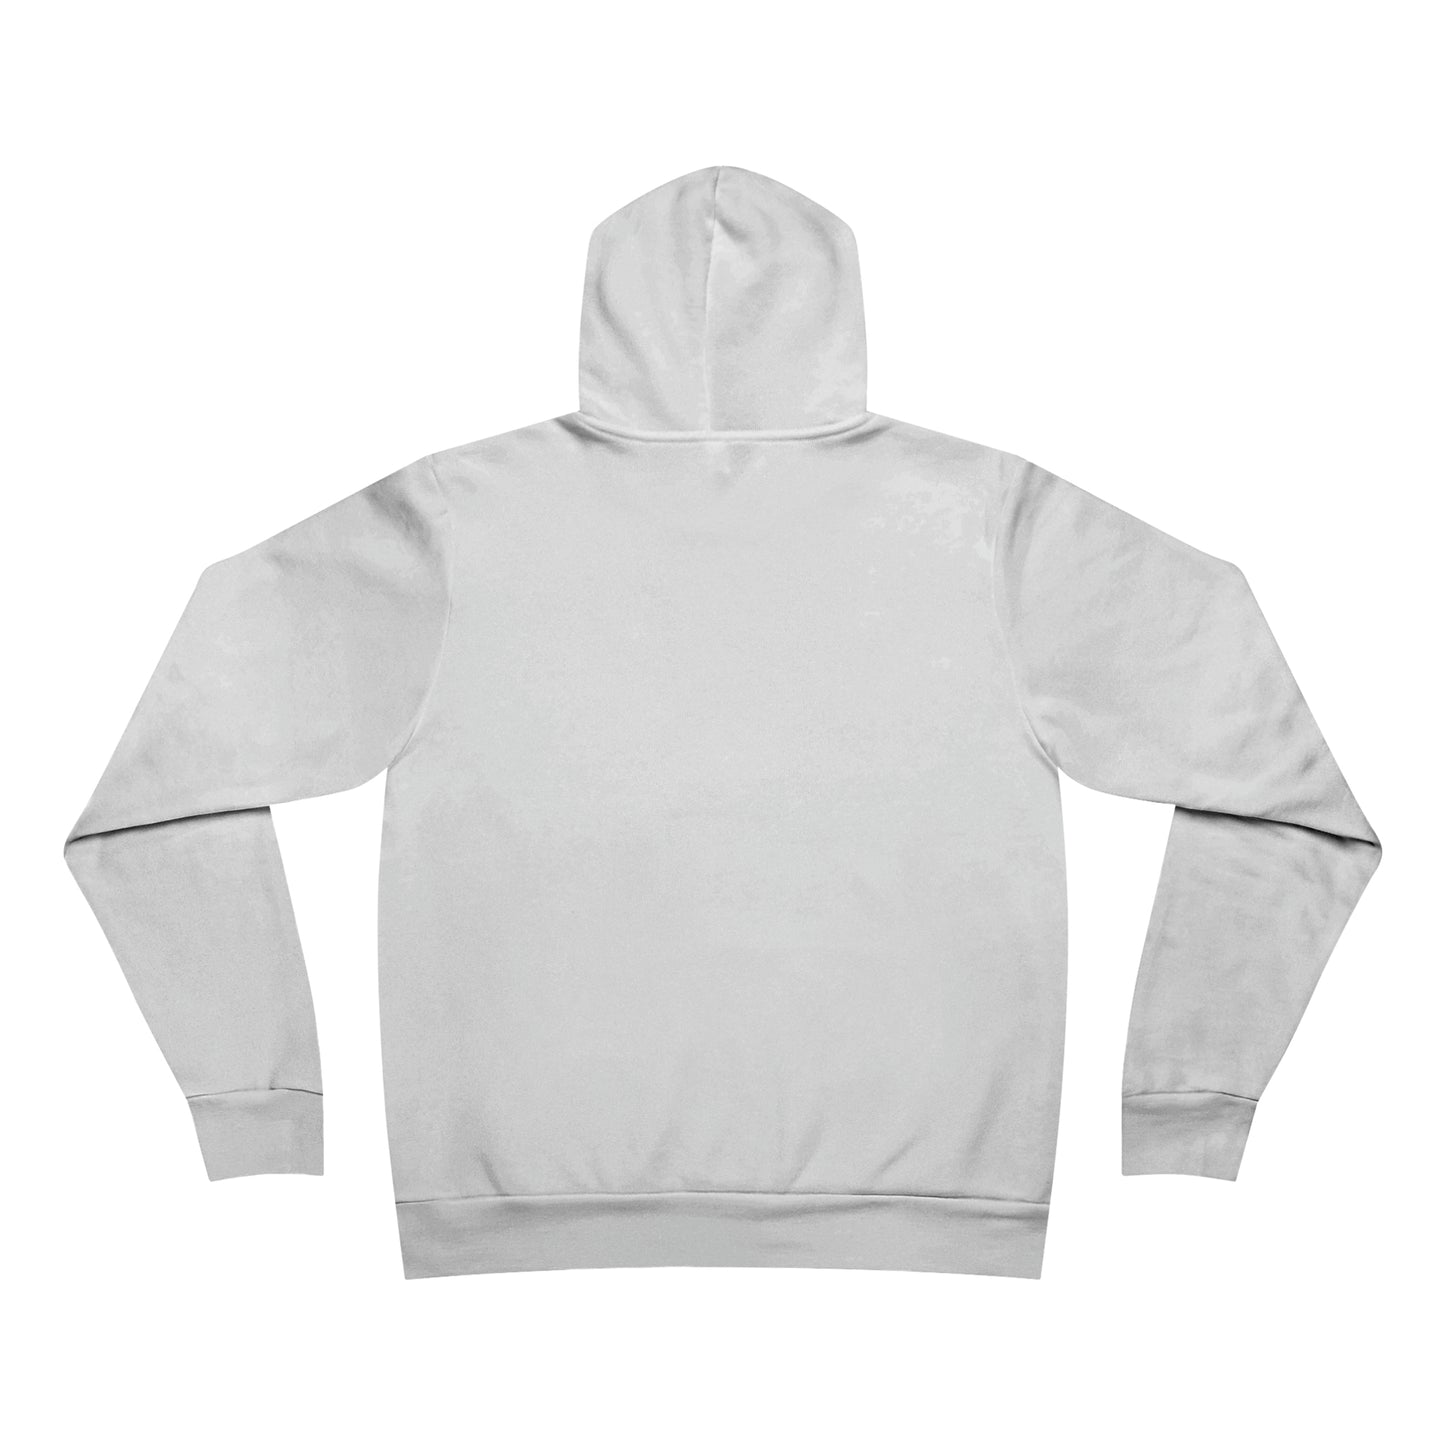 Better Together Bella Canvas Hoodie